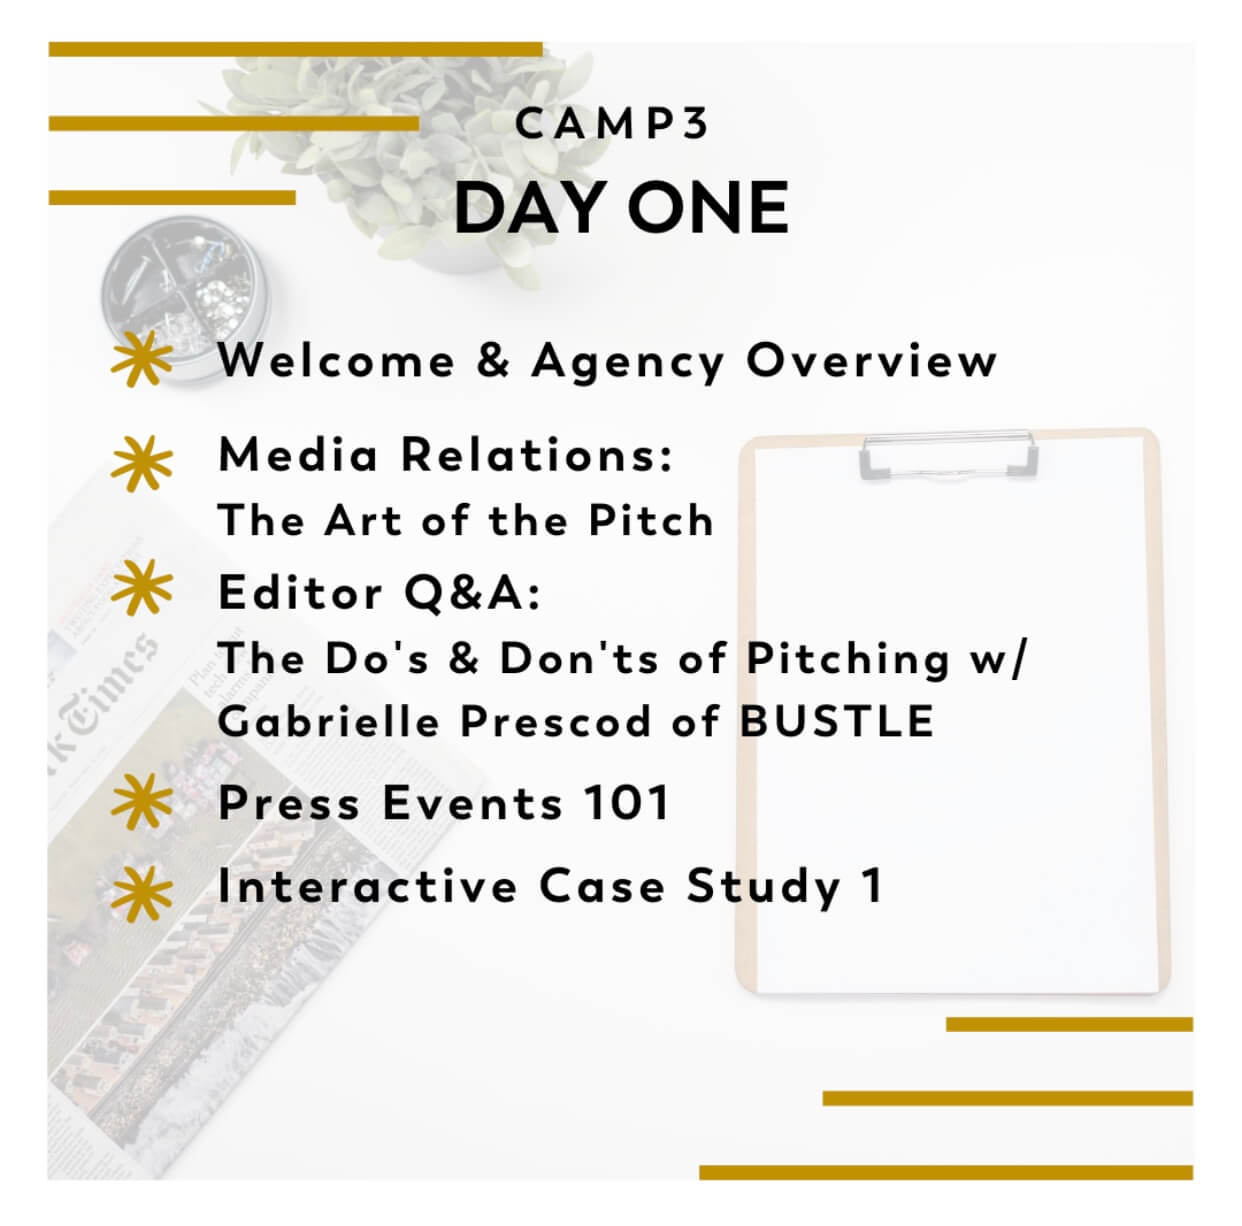 CAMP3 bootcamp day one